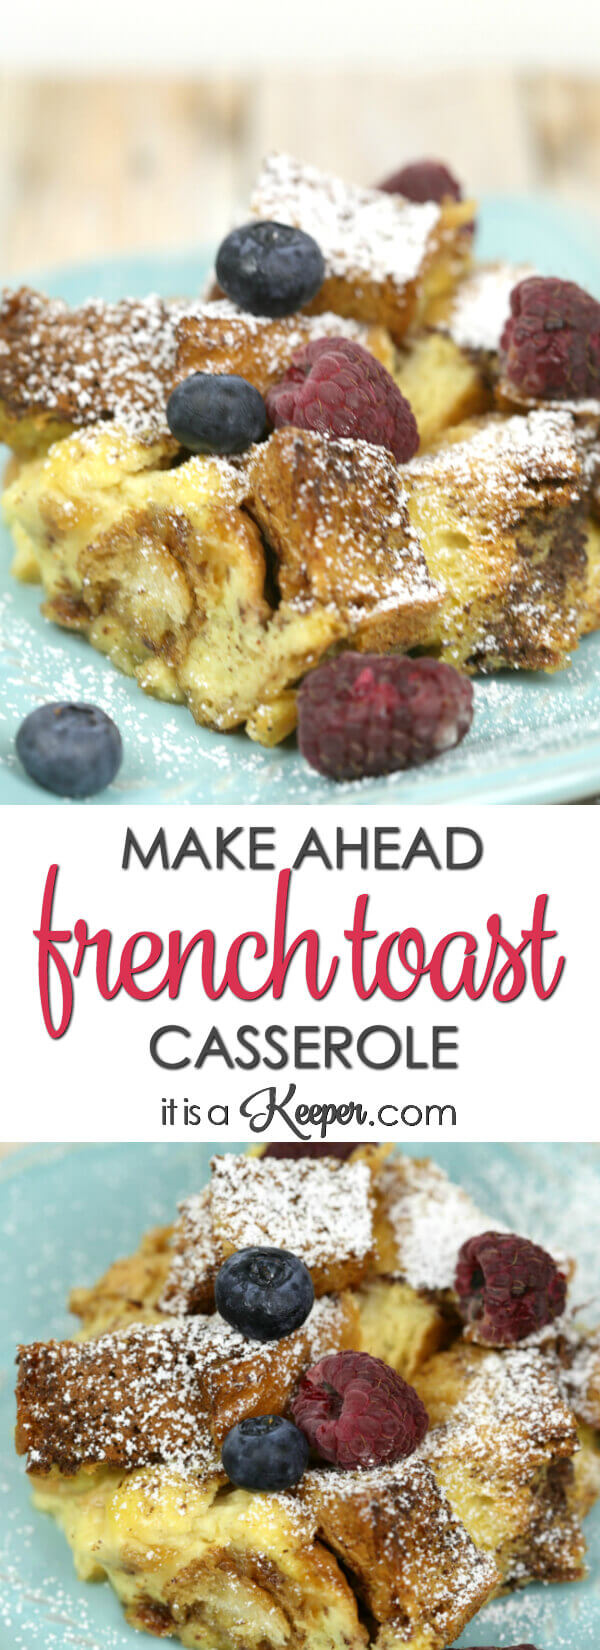 Overnight French Toast Casserole - this is an easy make ahead breakfast casserole recipe 